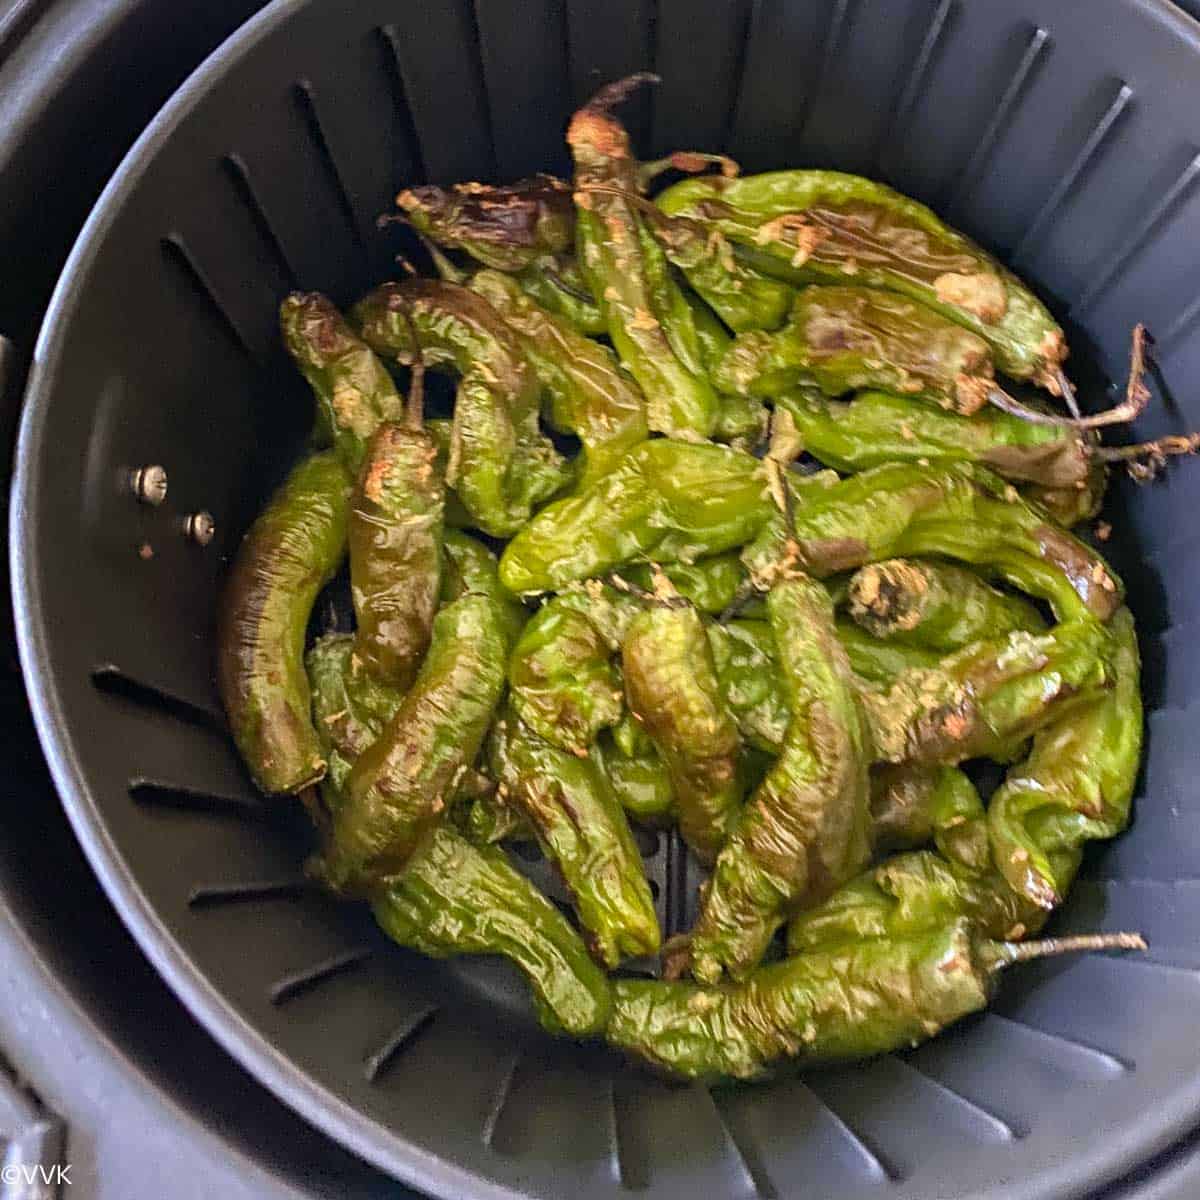 shishito peppers in air fryer after 4 minutes